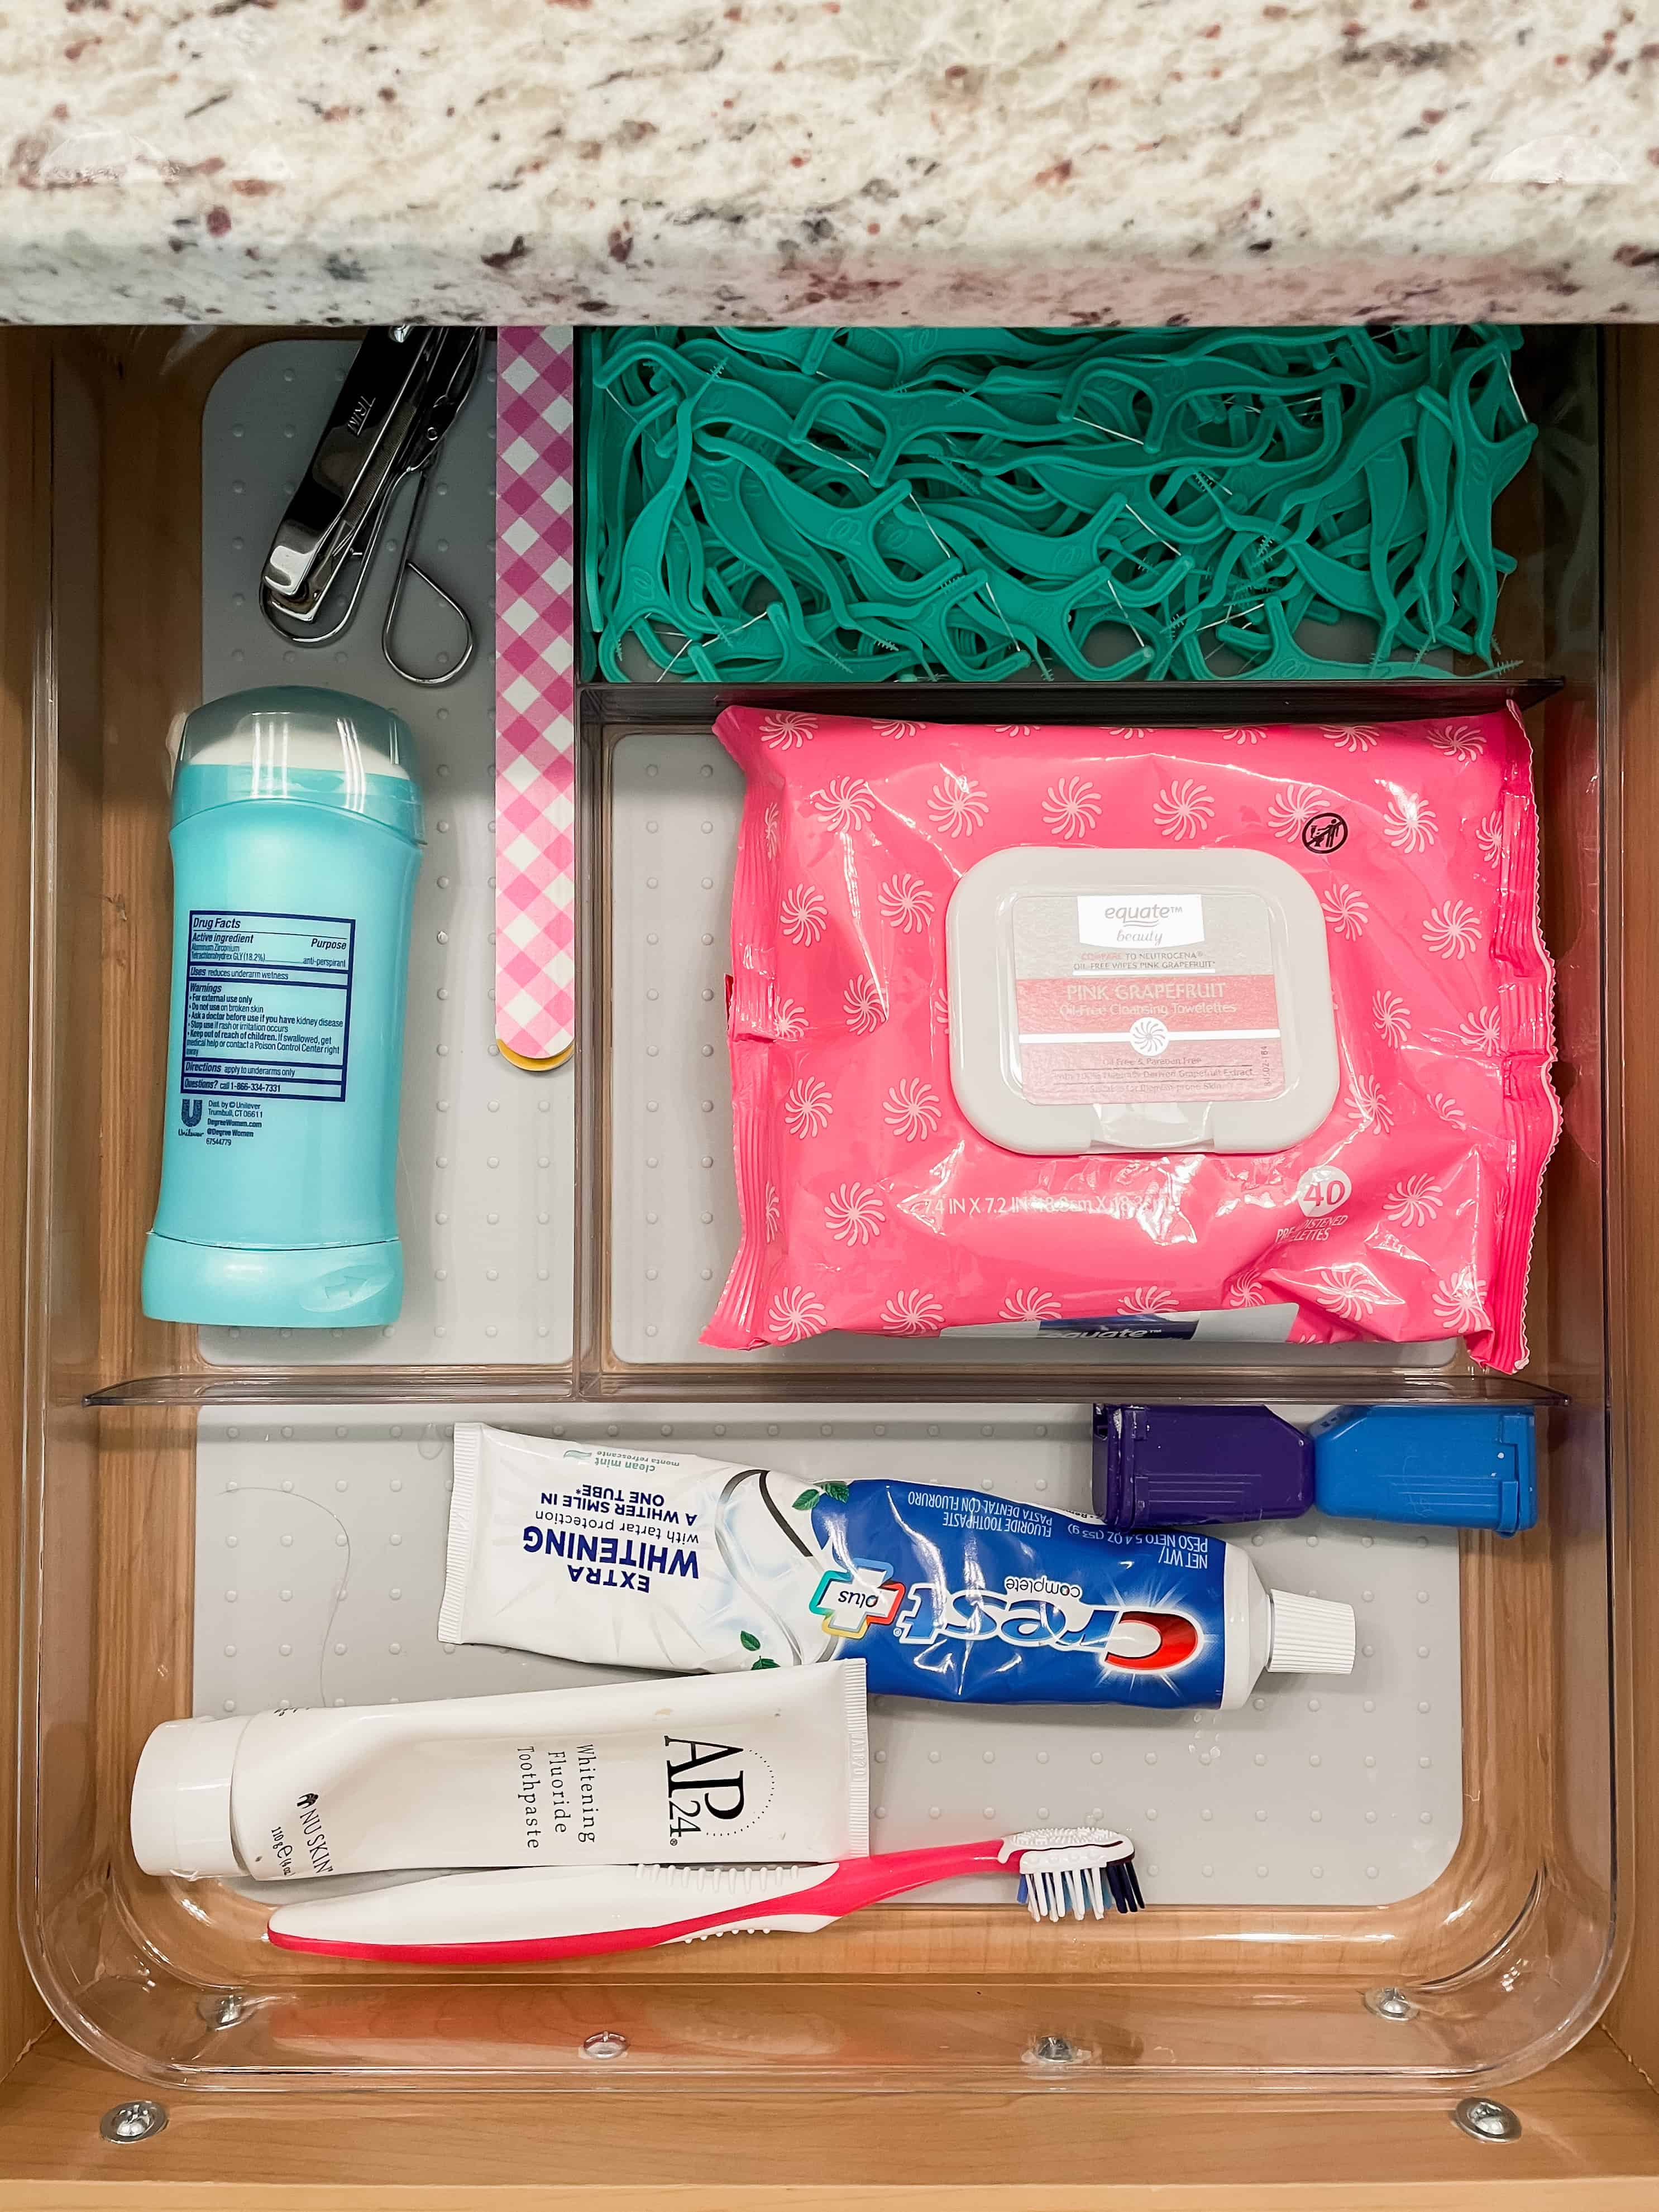 Bathroom organization. clear drawer organizer with toothpaste, deodorant, tooth flossers and makeup remover cloths.